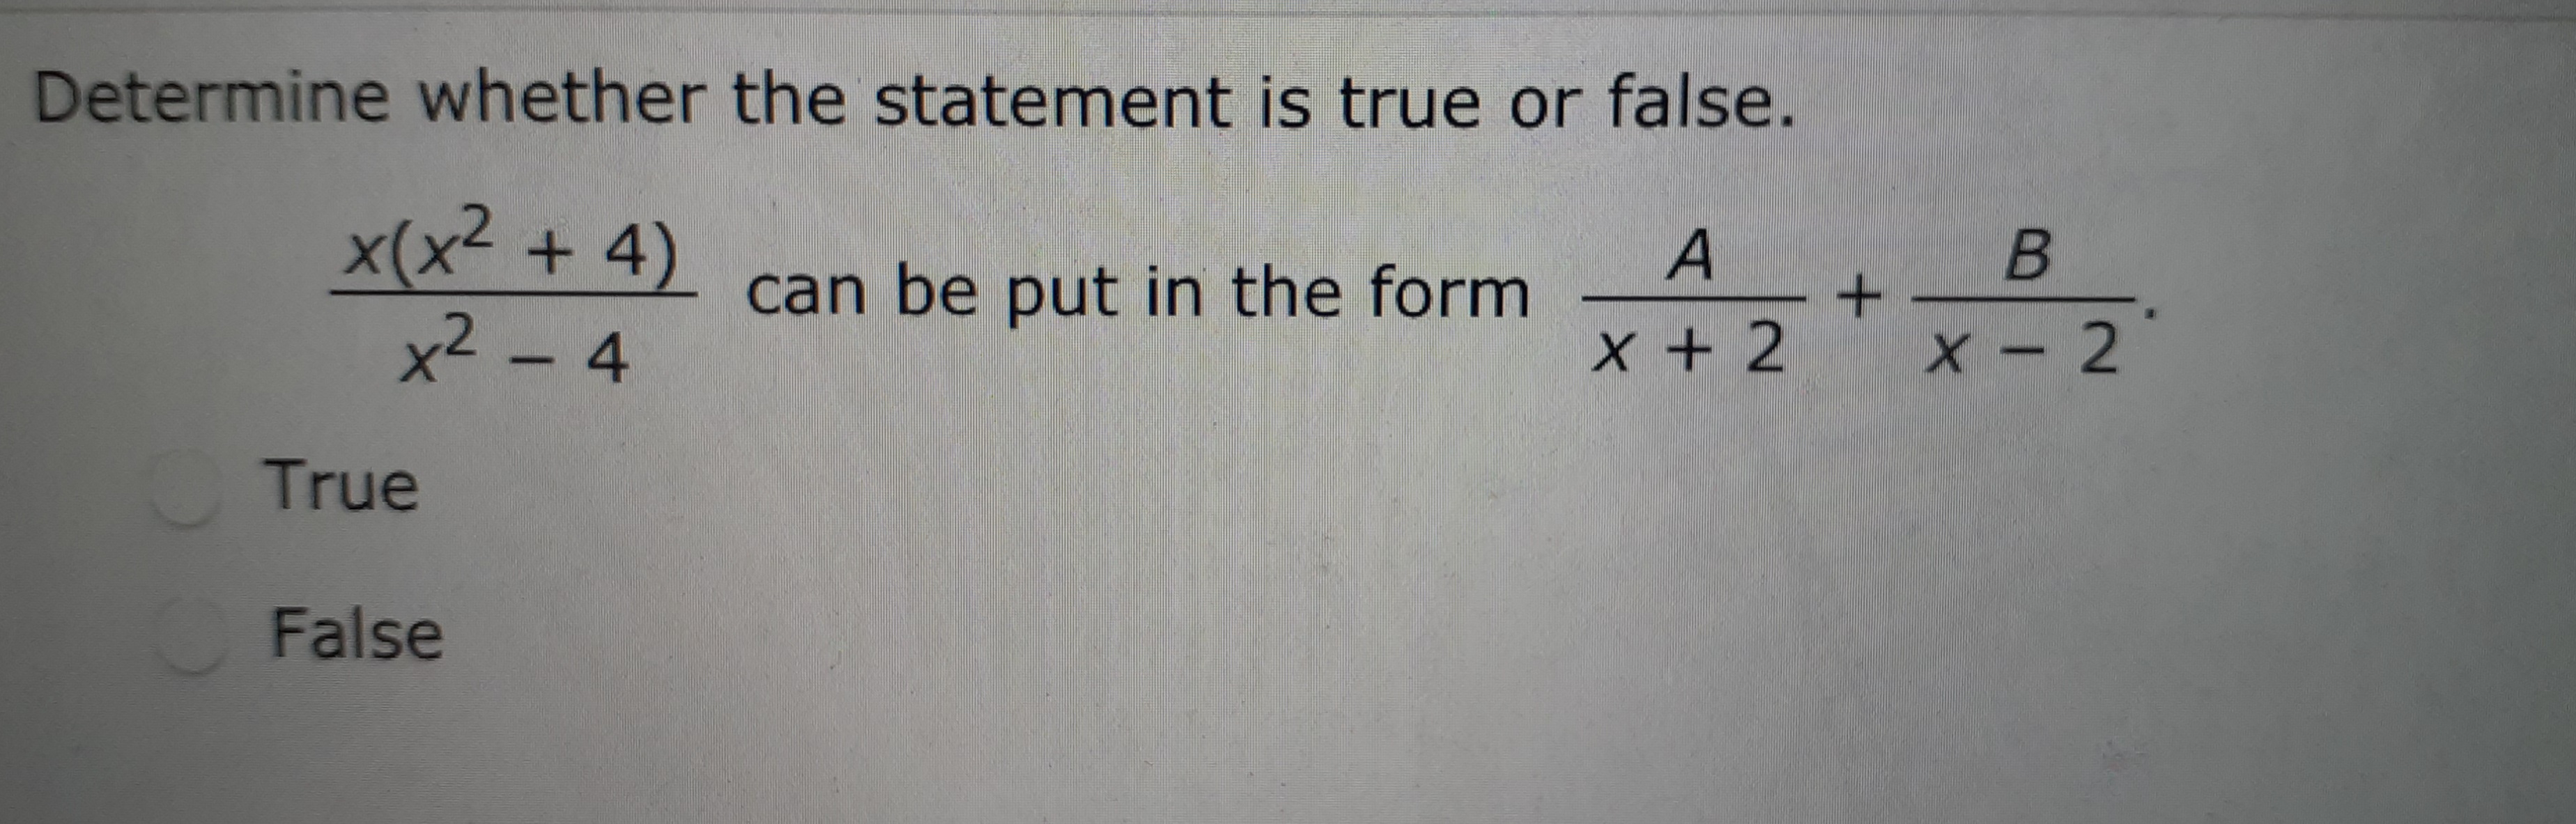 Determine whether the statement is true or false.
x(x² + 4)
x2 - 4
B
can be put in the form
x + 2
X - 2
True
False
